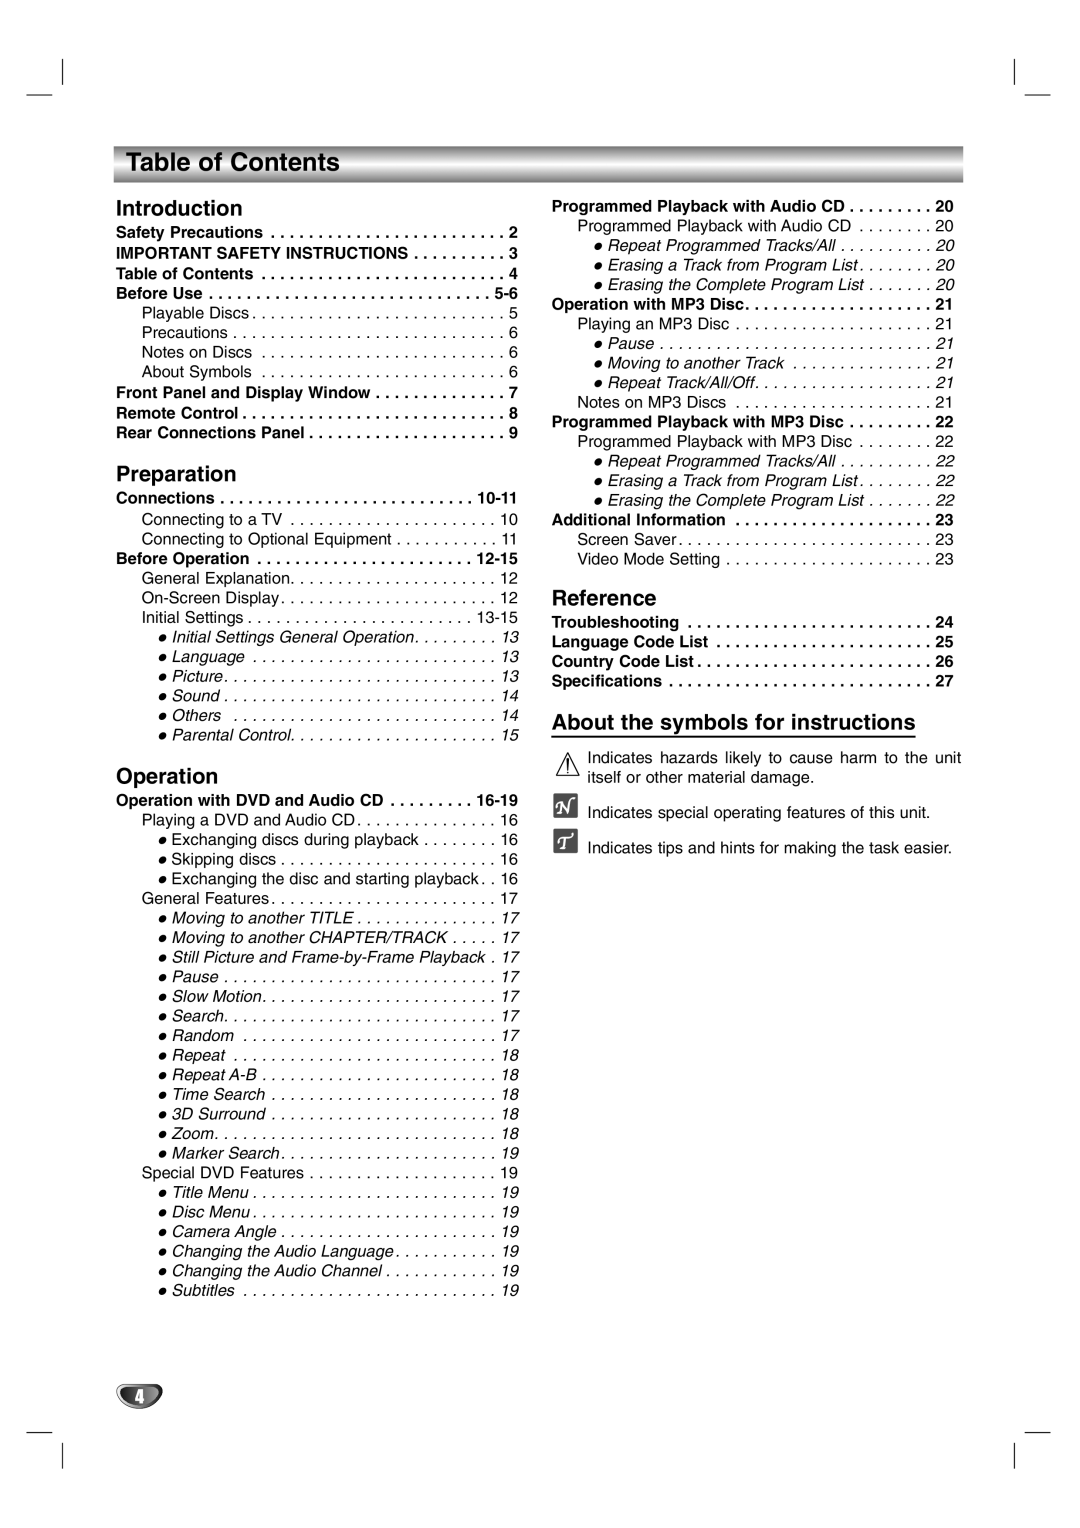 Zenith DVB251 Table of Contents, Introduction, Preparation, Operation, Reference, About the symbols for instructions 